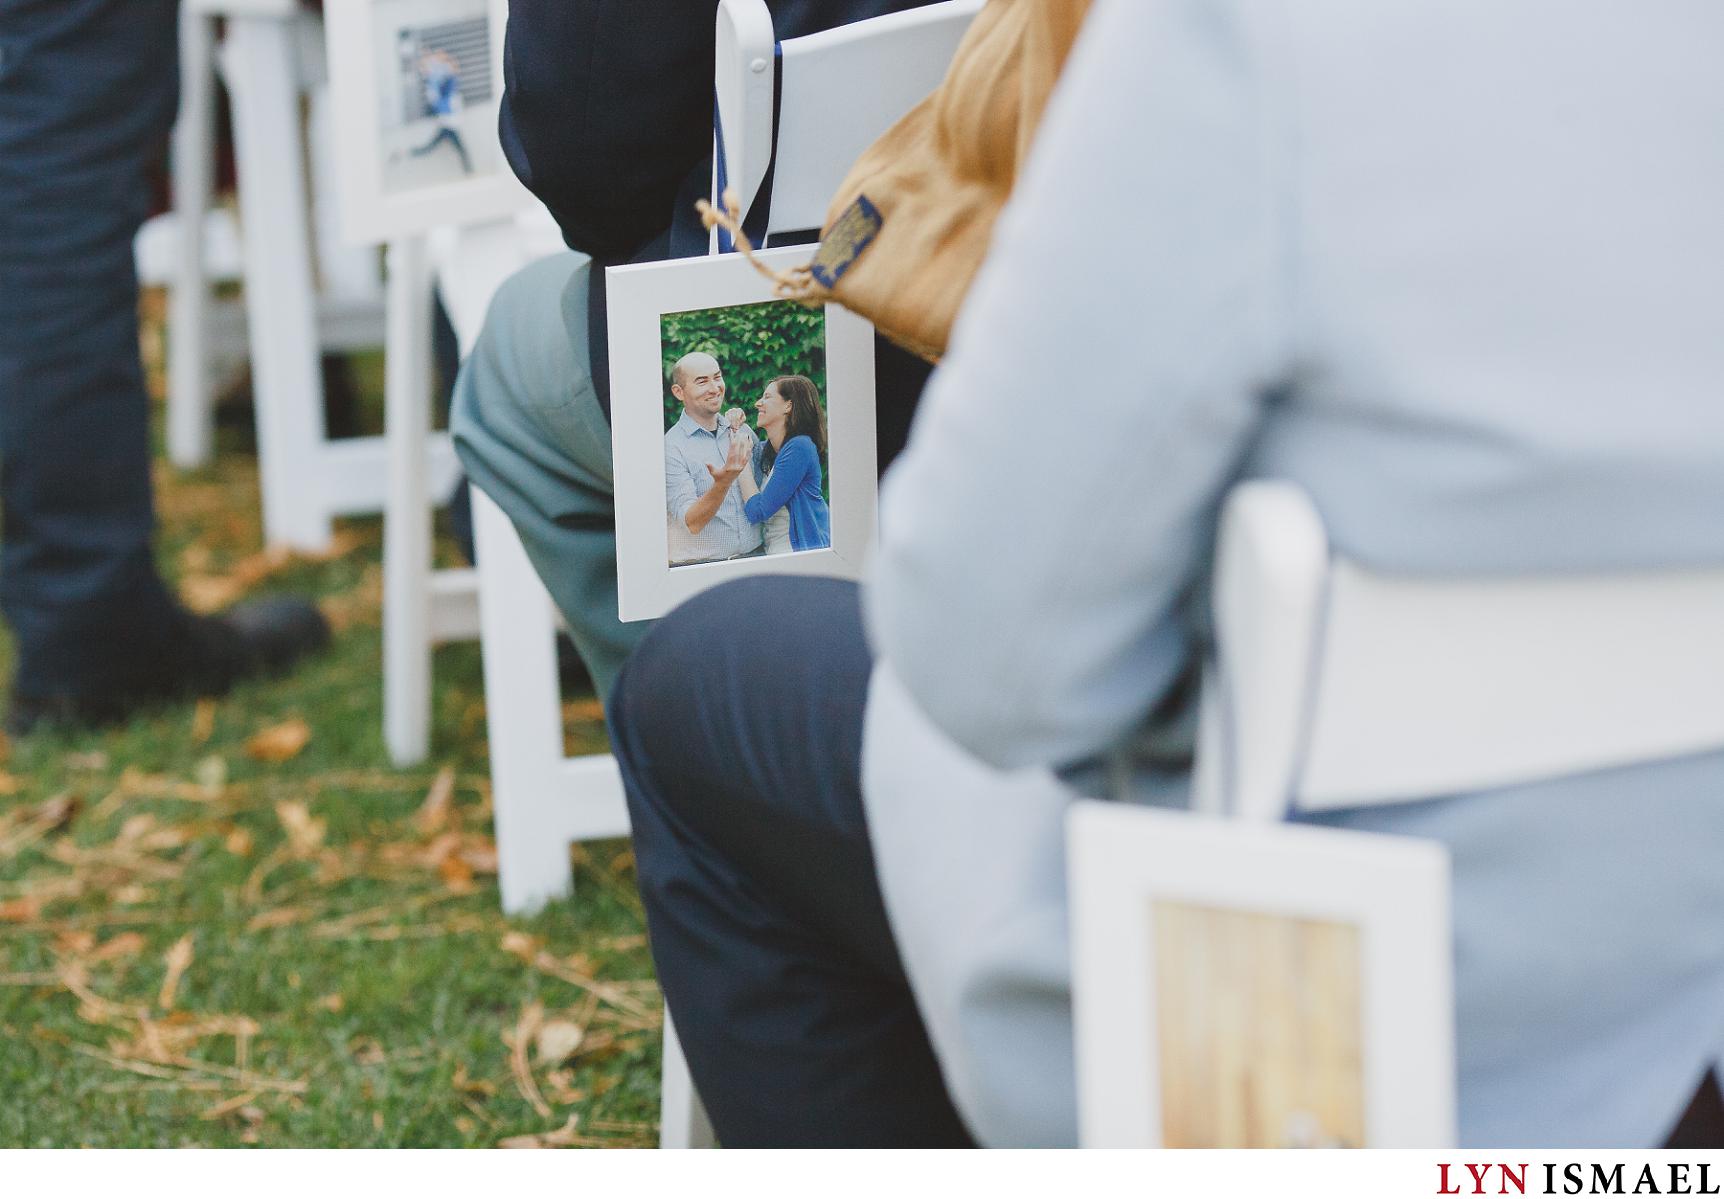 Simple white frames featuring the couple's engagement photos line up the aisle.